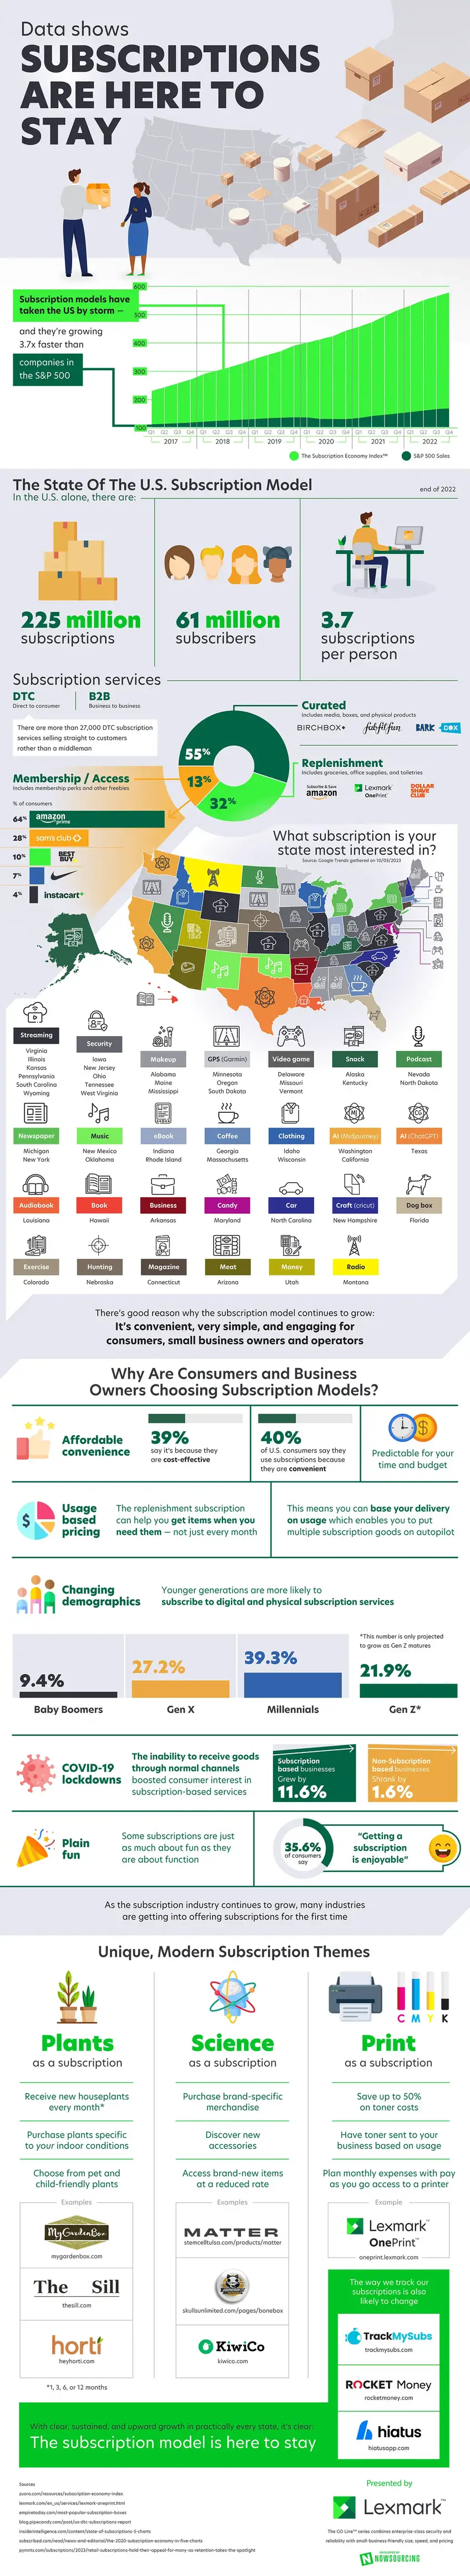 Infographic: Subscriptions as a business model